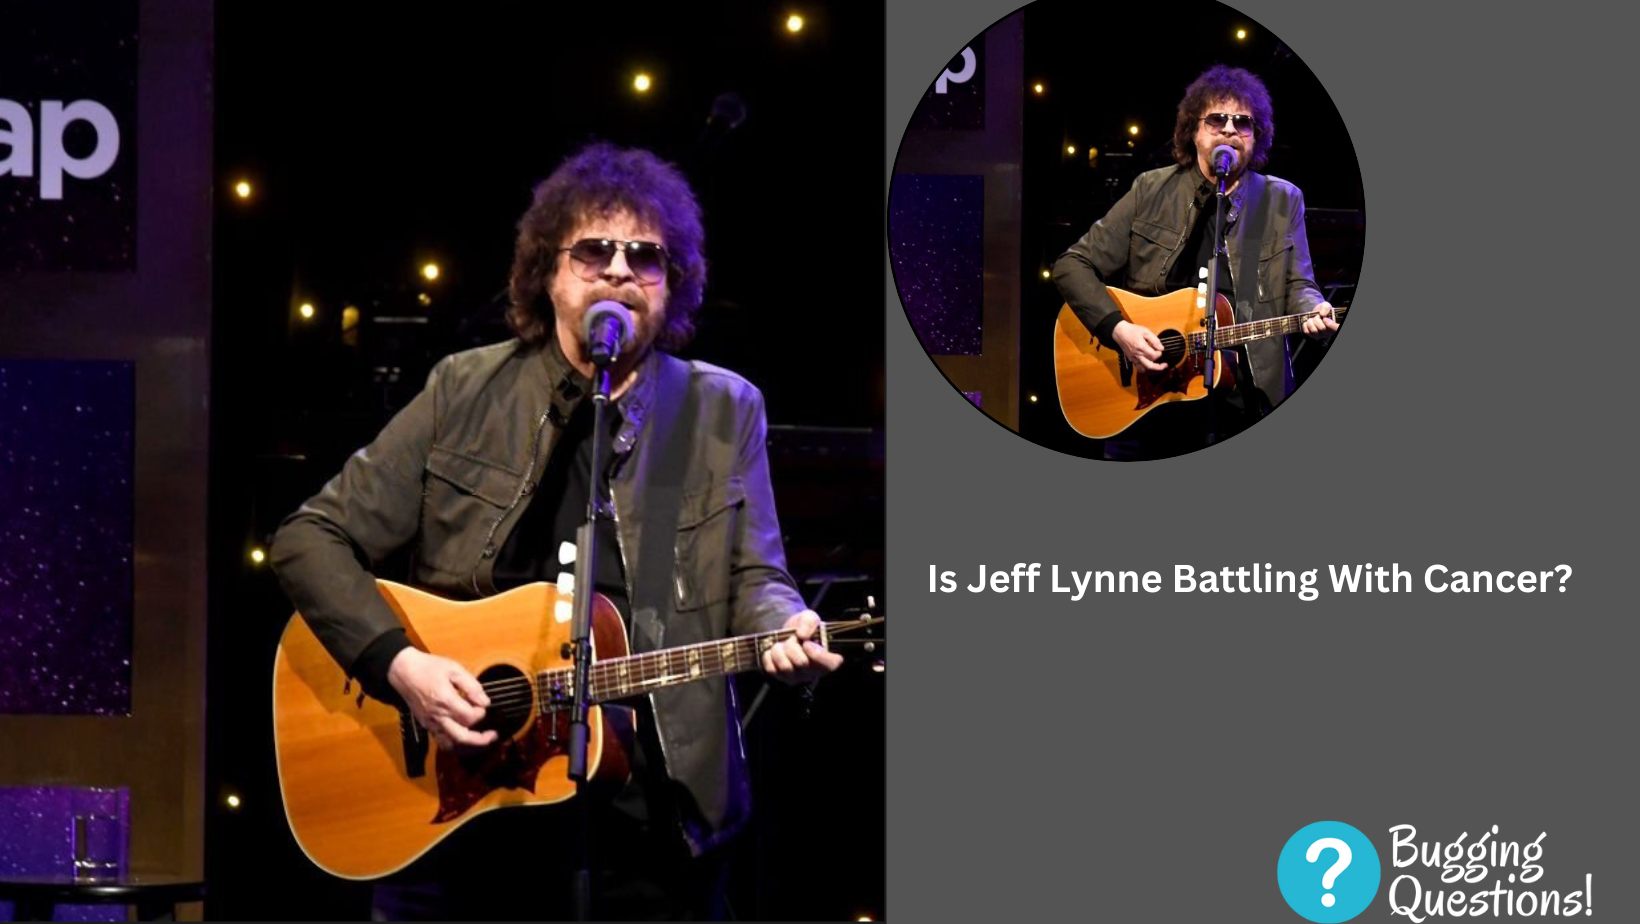 Is Jeff Lynne Battling With Cancer?